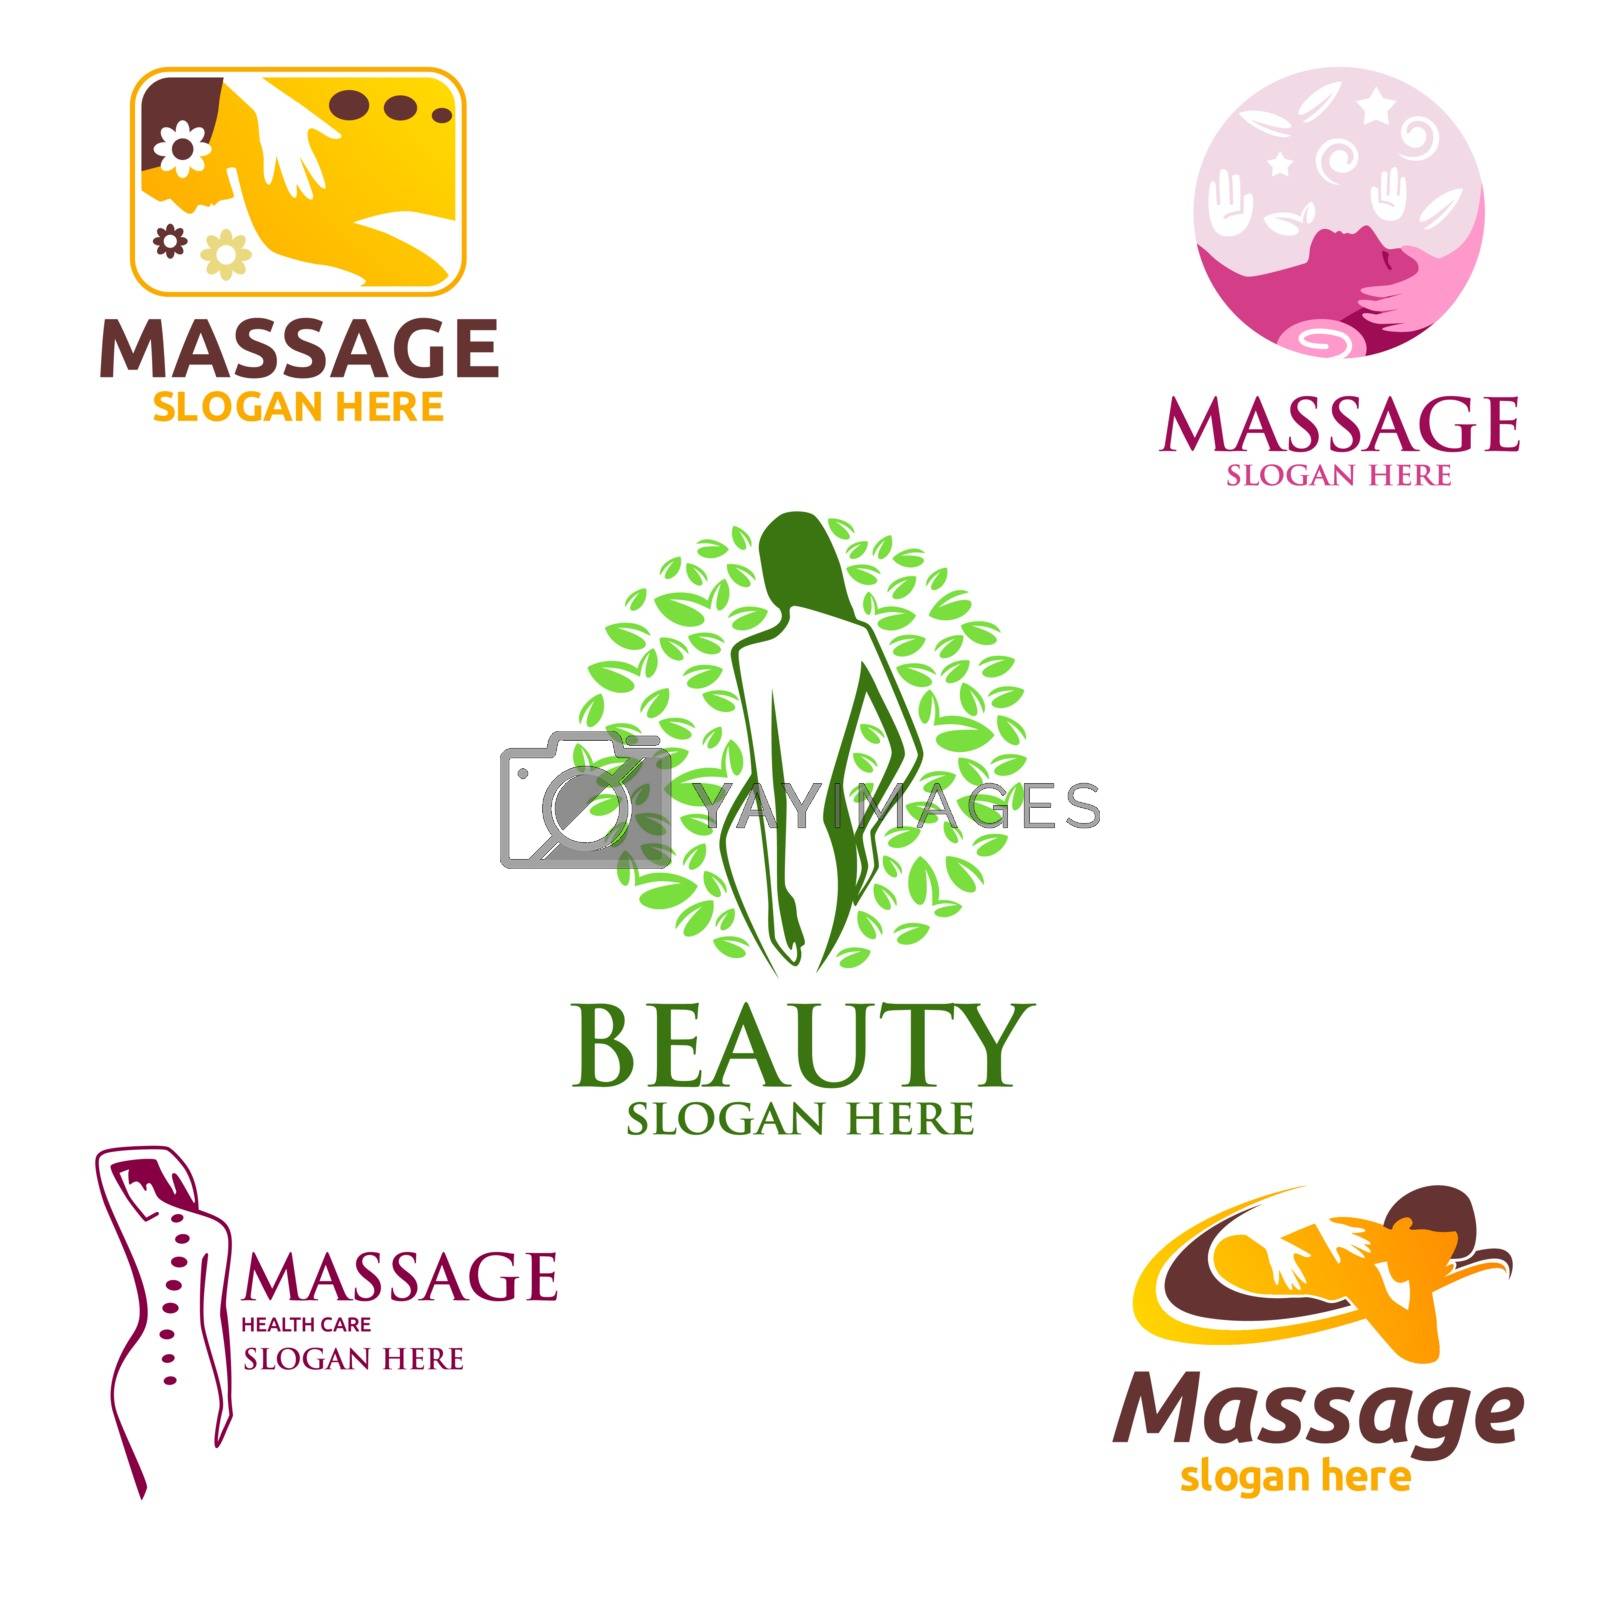 Royalty free image of Chiropractic, massage, back pain and osteopathy Logo Design by denayuneyi